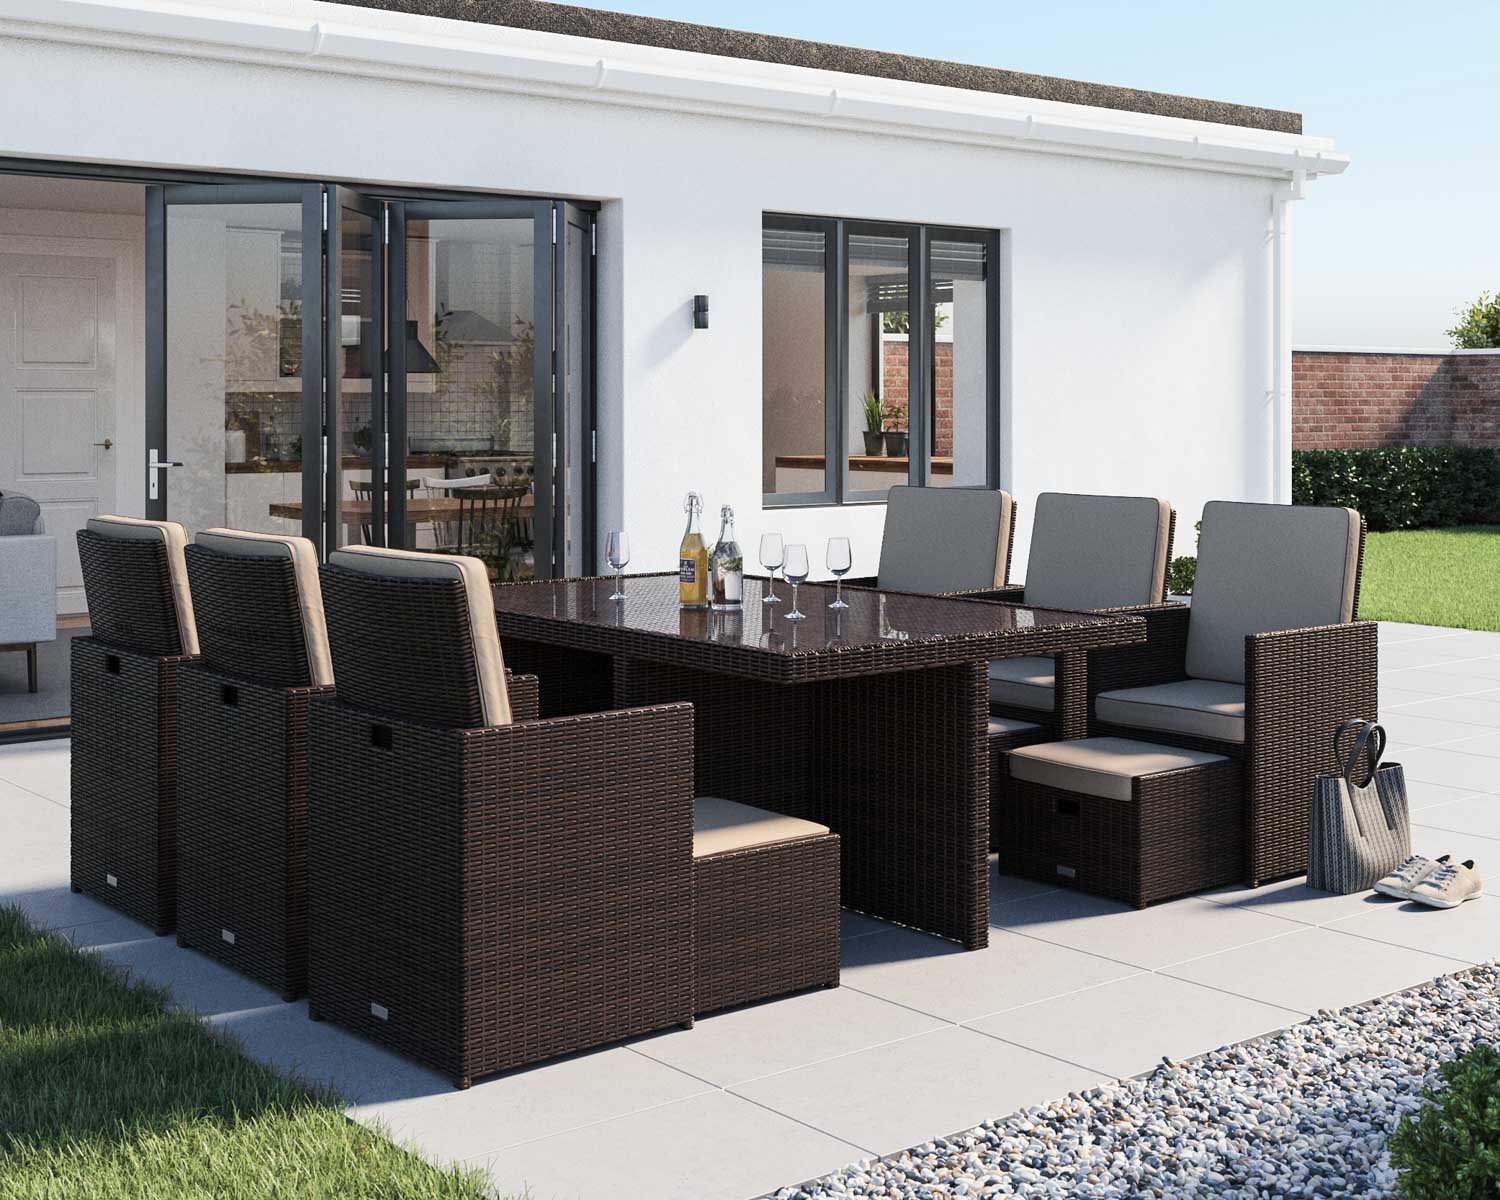 6 Seat Rattan Garden Cube Dining Set In Brown With Footstools Barcelona Rattan Direct